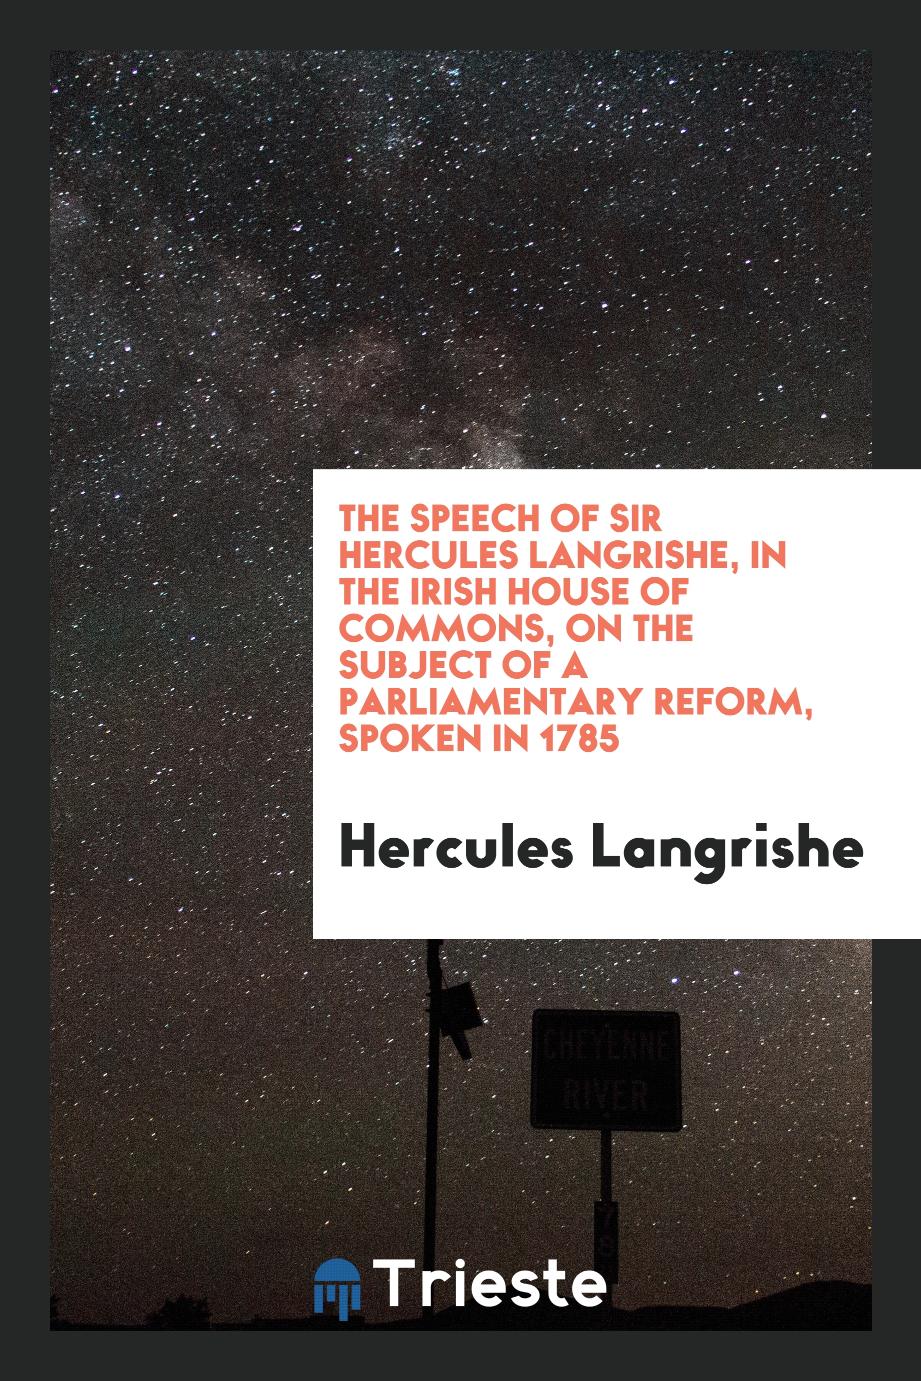 The speech of Sir Hercules Langrishe, in the Irish House of commons, on the subject of a parliamentary reform, spoken in 1785